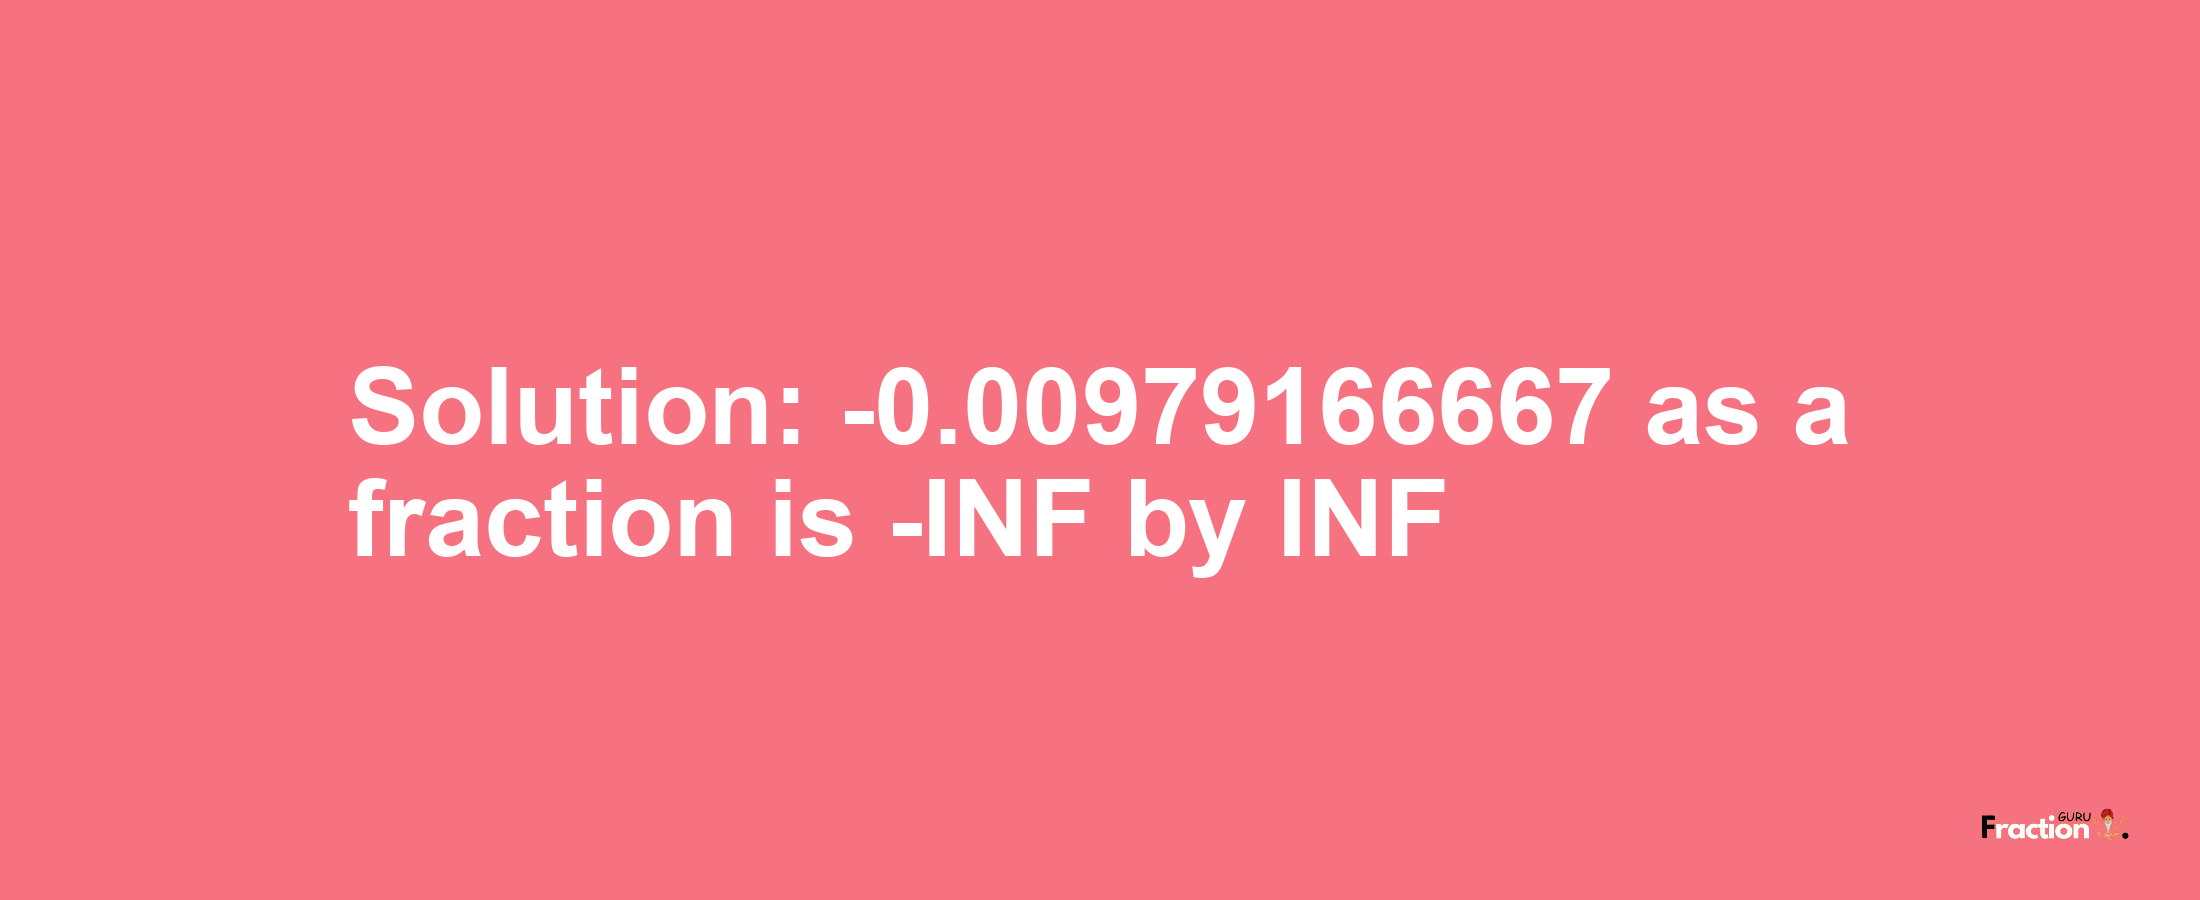 Solution:-0.00979166667 as a fraction is -INF/INF